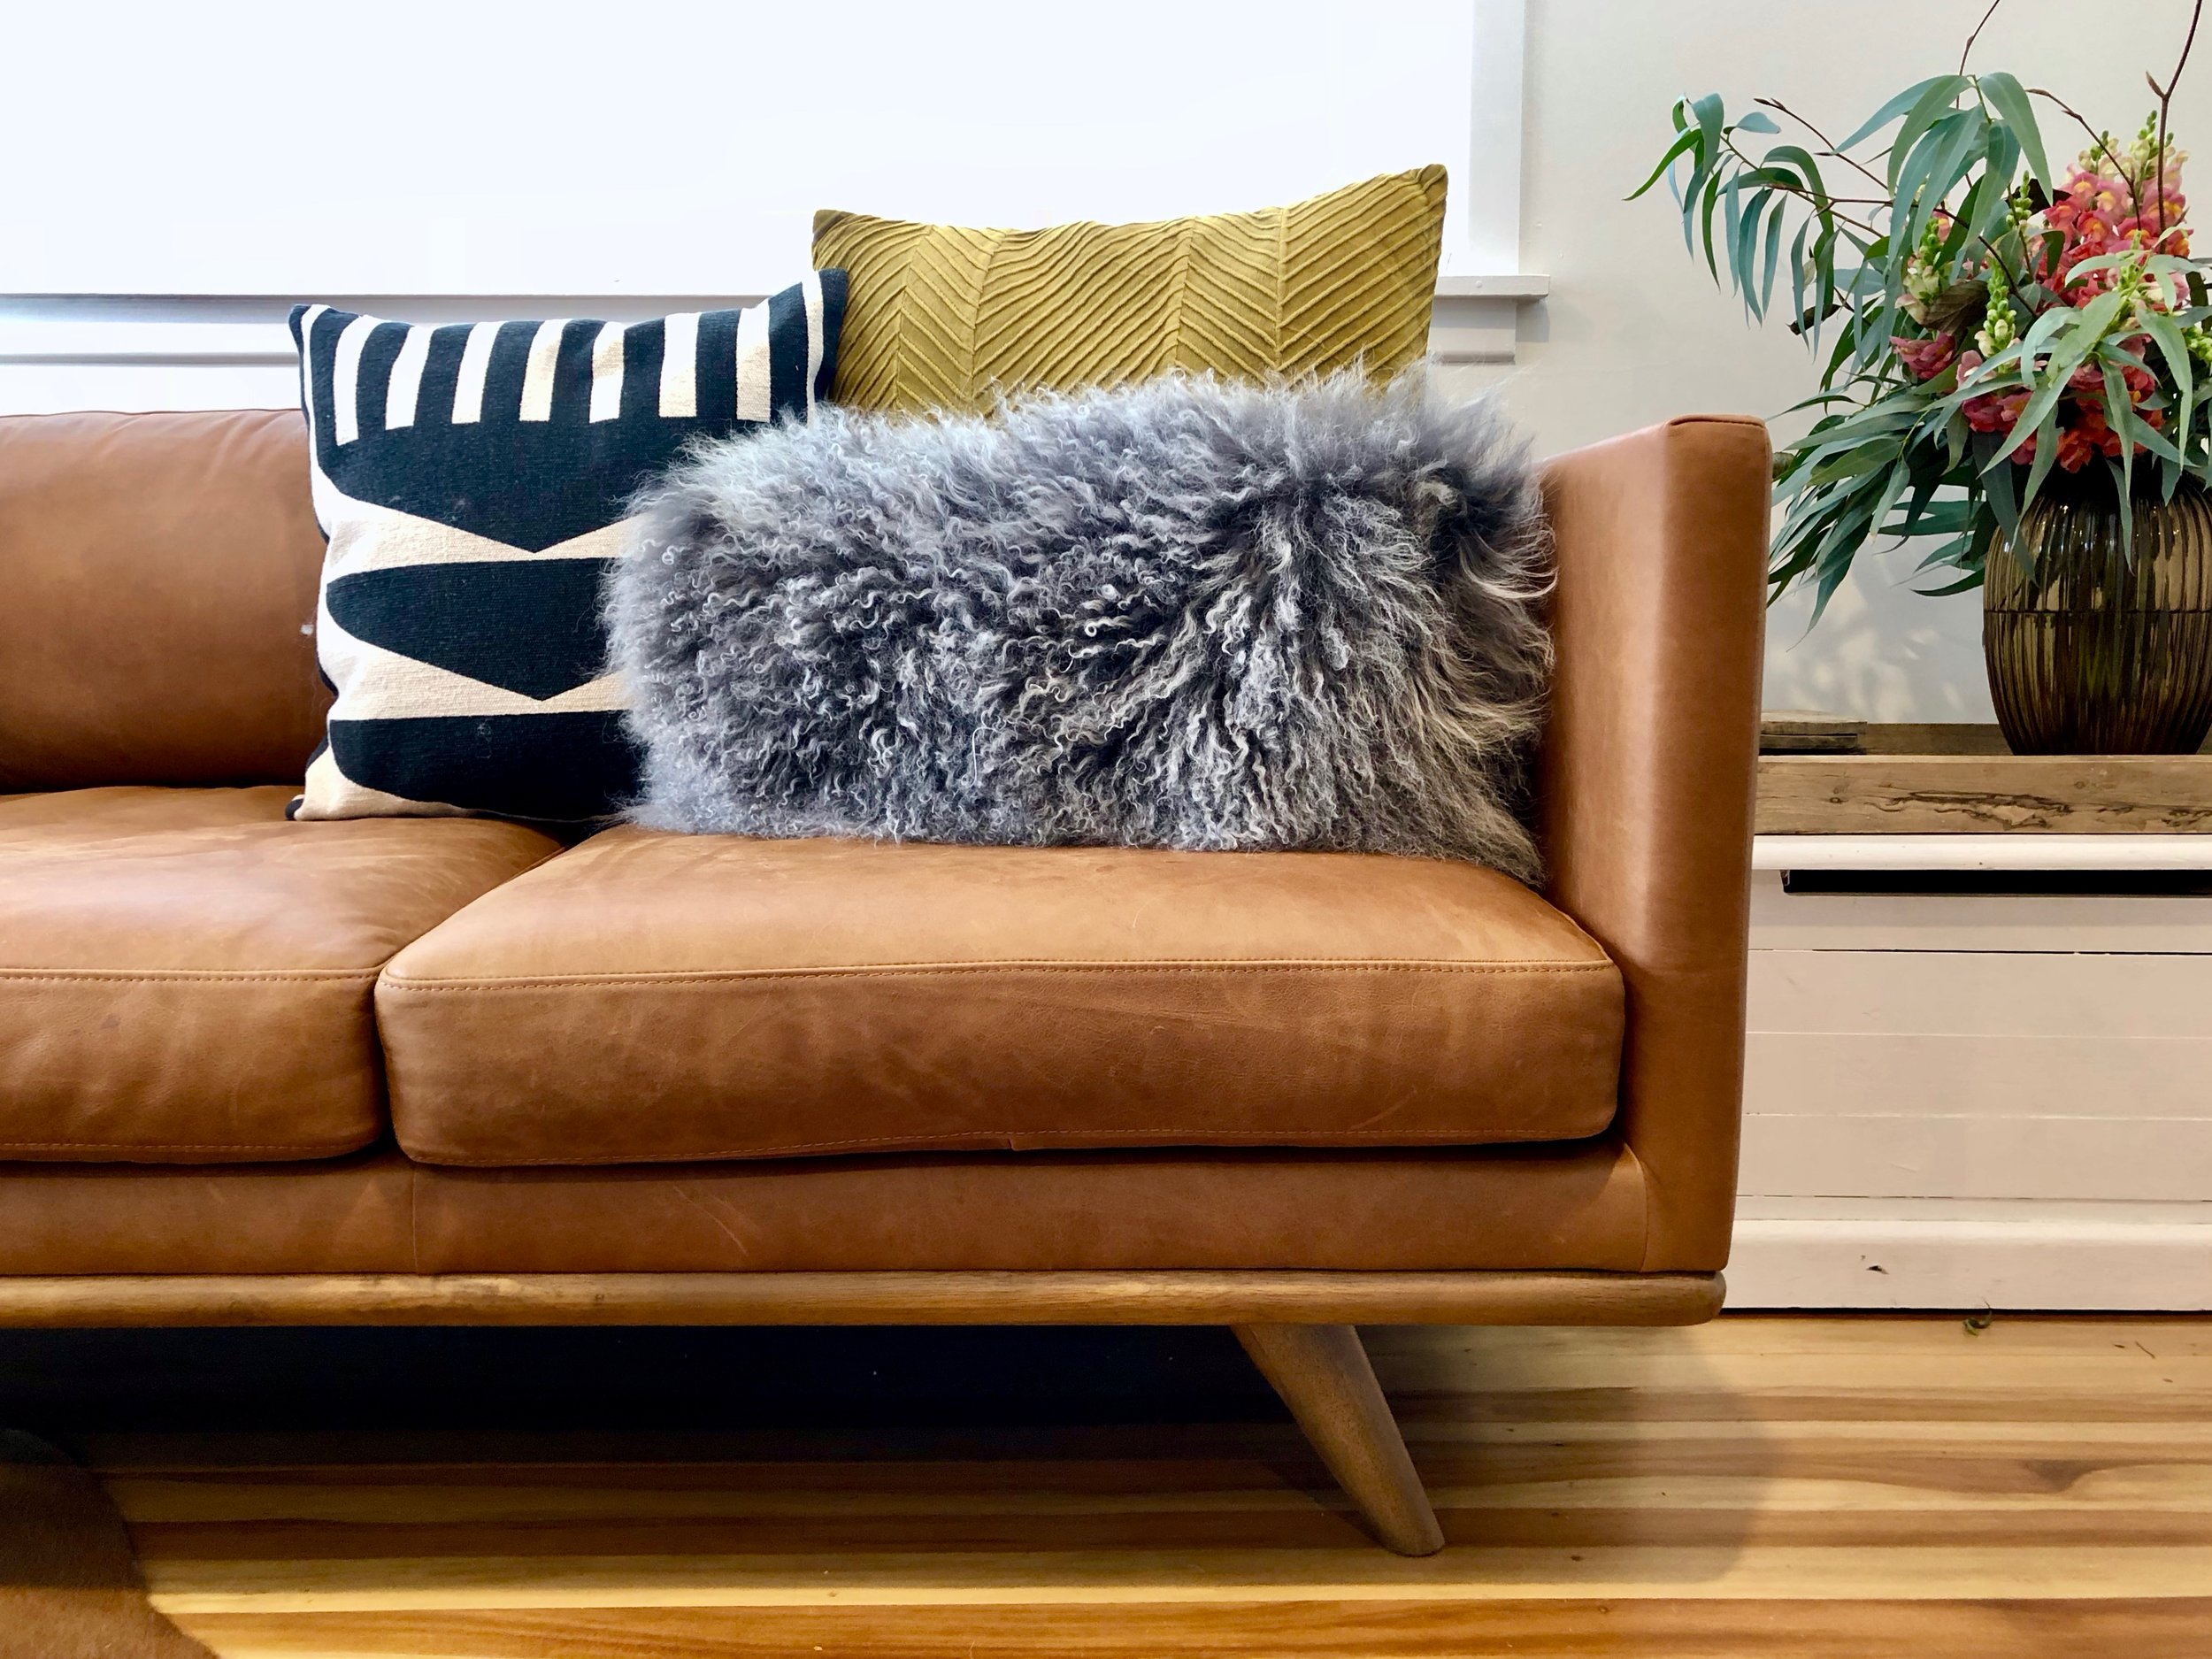 Pearson and Projects Living Room Reveal Nood Cushions Leather Brown Couch.jpg